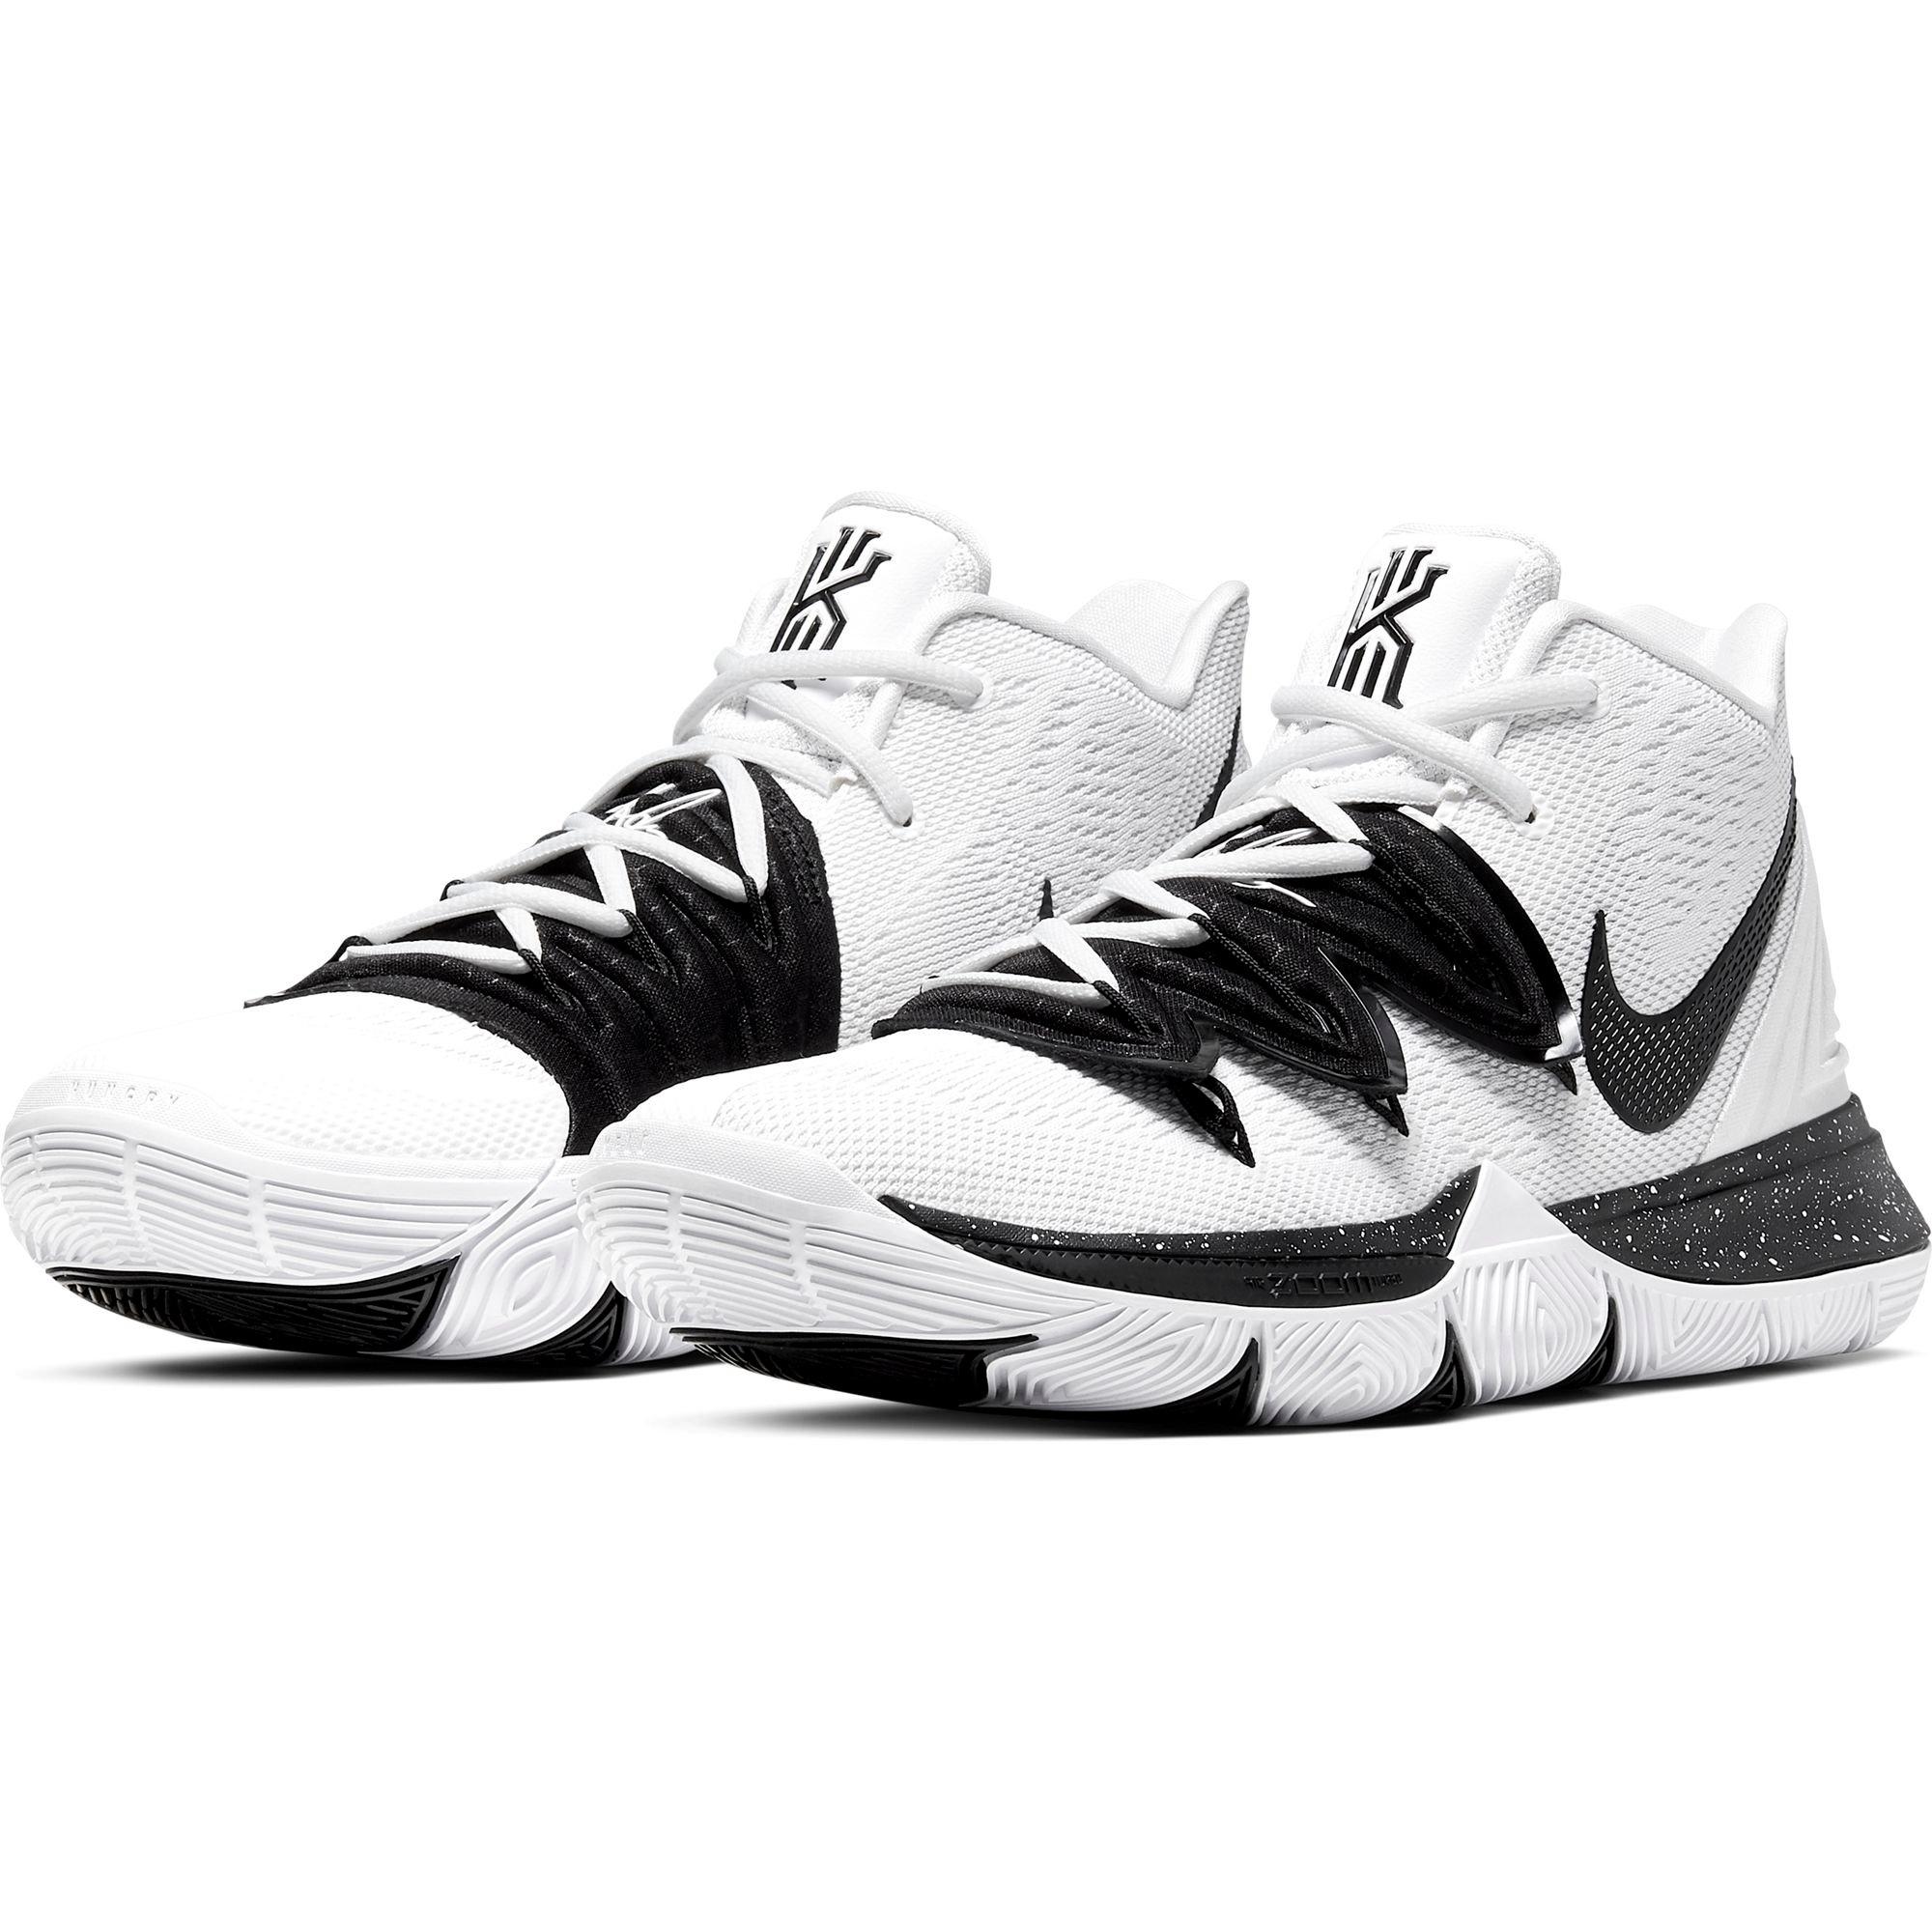 white and black kyrie 5